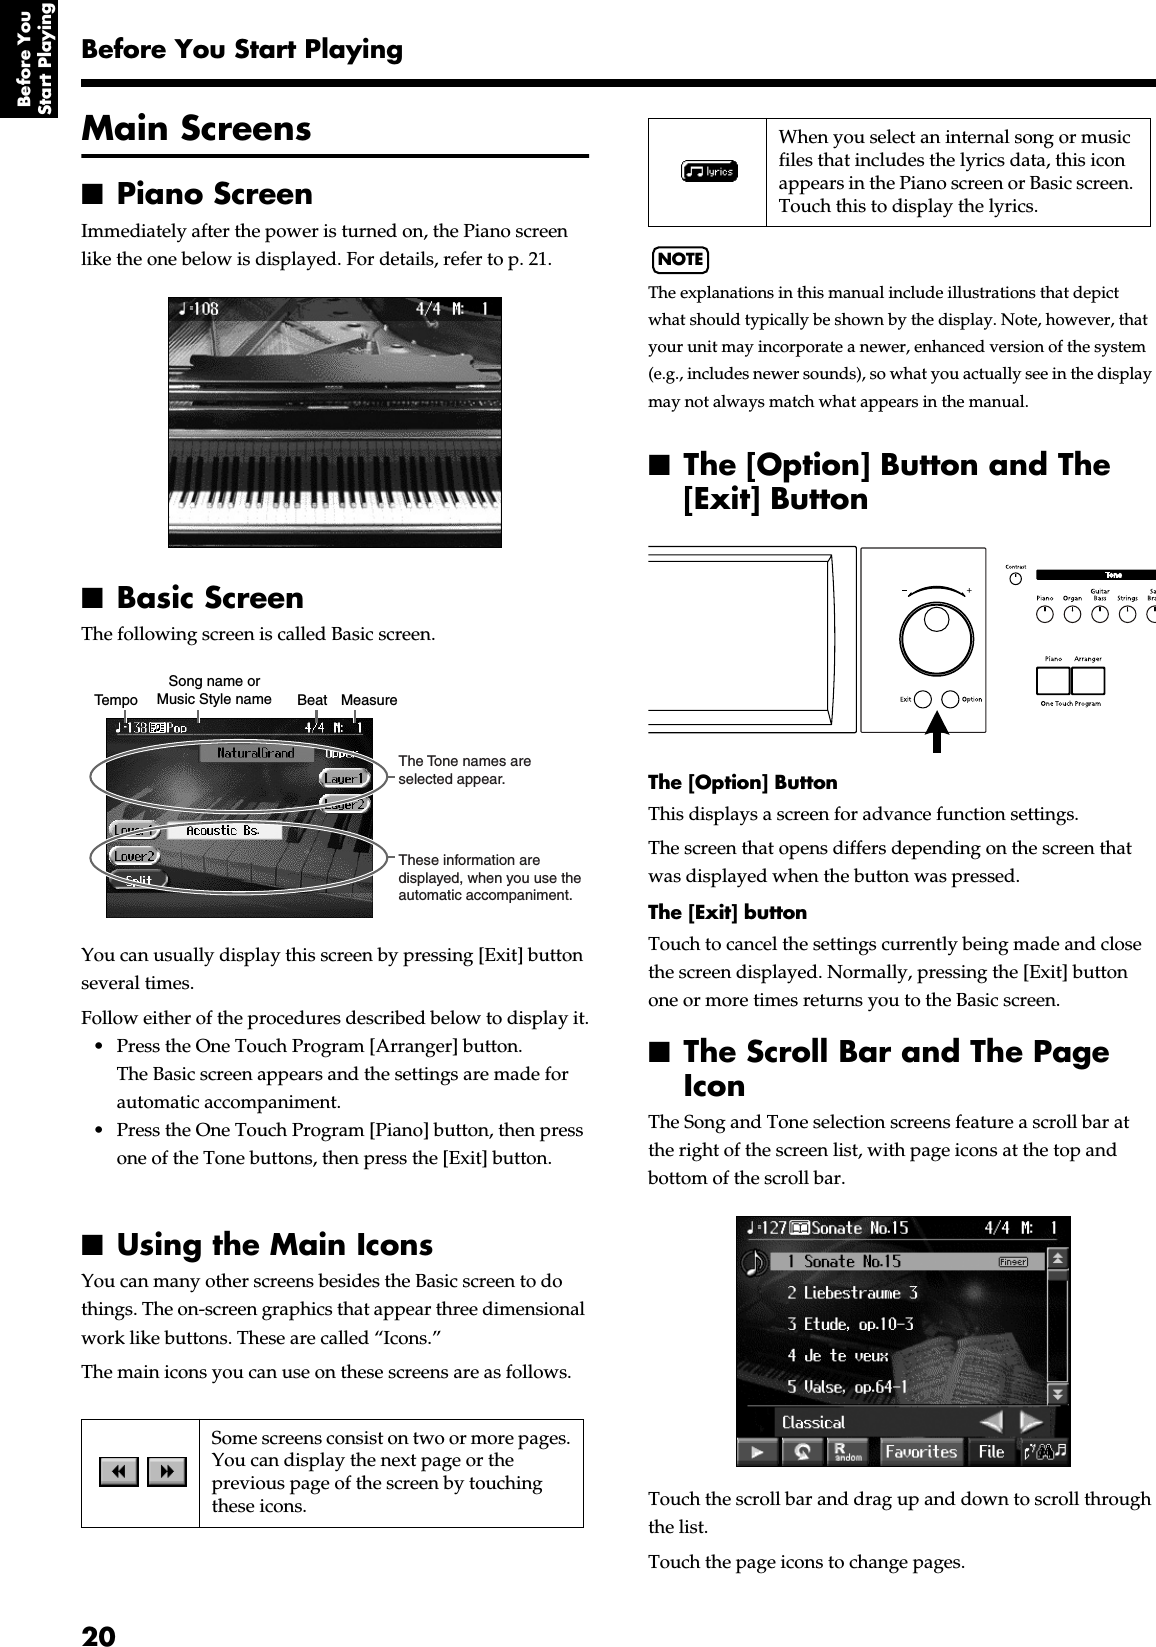  20Before You Start Playing Before You Start Playing Main Screens ■ Piano Screen Immediately after the power is turned on, the Piano screen like the one below is displayed. For details, refer to p. 21. ■ Basic Screen The following screen is called Basic screen.You can usually display this screen by pressing [Exit] button several times.Follow either of the procedures described below to display it.• Press the One Touch Program [Arranger] button.The Basic screen appears and the settings are made for automatic accompaniment.• Press the One Touch Program [Piano] button, then press one of the Tone buttons, then press the [Exit] button. ■ Using the Main Icons You can many other screens besides the Basic screen to do things. The on-screen graphics that appear three dimensional work like buttons. These are called “Icons.”The main icons you can use on these screens are as follows.NOTE The explanations in this manual include illustrations that depict what should typically be shown by the display. Note, however, that your unit may incorporate a newer, enhanced version of the system (e.g., includes newer sounds), so what you actually see in the display may not always match what appears in the manual. 985 ■ The [Option] Button and The [Exit] Button The [Option] Button This displays a screen for advance function settings.The screen that opens differs depending on the screen that was displayed when the button was pressed. The [Exit] button Touch to cancel the settings currently being made and close the screen displayed. Normally, pressing the [Exit] button one or more times returns you to the Basic screen. ■ The Scroll Bar and The Page Icon The Song and Tone selection screens feature a scroll bar at the right of the screen list, with page icons at the top and bottom of the scroll bar.Touch the scroll bar and drag up and down to scroll through the list.Touch the page icons to change pages. Some screens consist on two or more pages.You can display the next page or the previous page of the screen by touching these icons.TempoSong name orMusic Style name Beat MeasureThese information are displayed, when you use the automatic accompaniment.The Tone names are selected appear. When you select an internal song or music files that includes the lyrics data, this icon appears in the Piano screen or Basic screen. Touch this to display the lyrics.